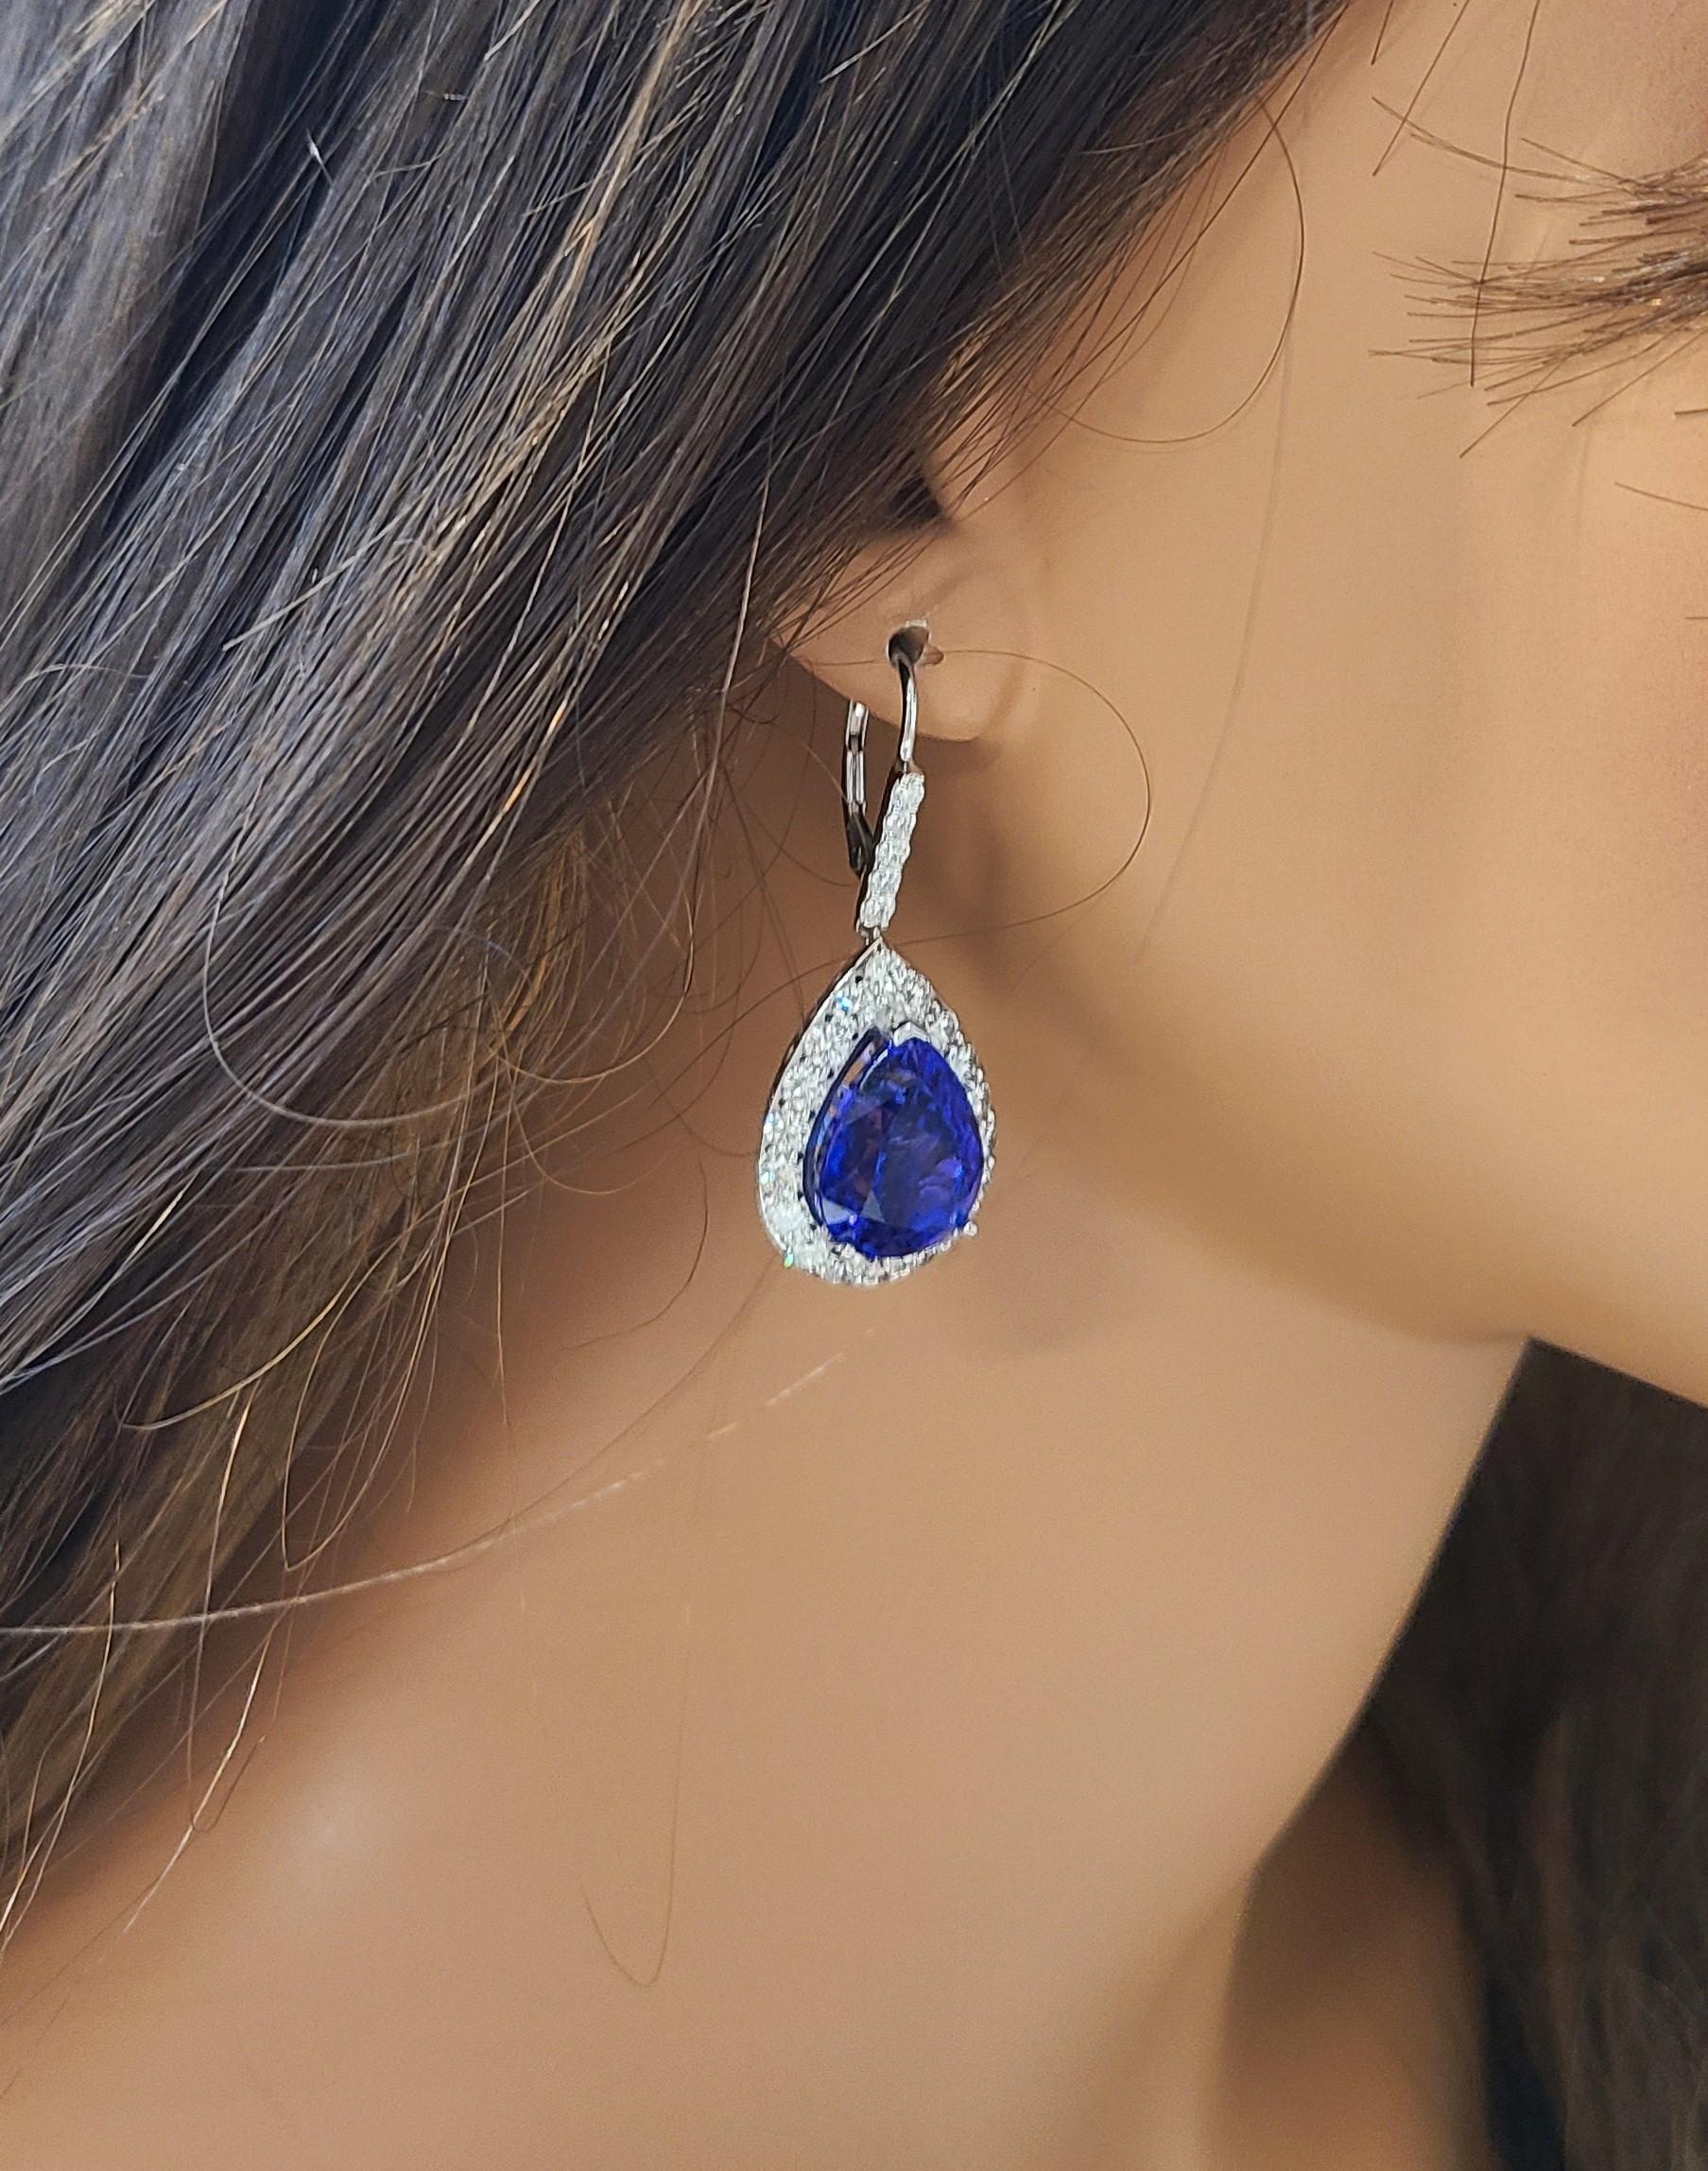 Contemporary 23 Carat Total Pear Shaped Tanzanite & Diamond Dangle Earrings in 18K White Gold For Sale